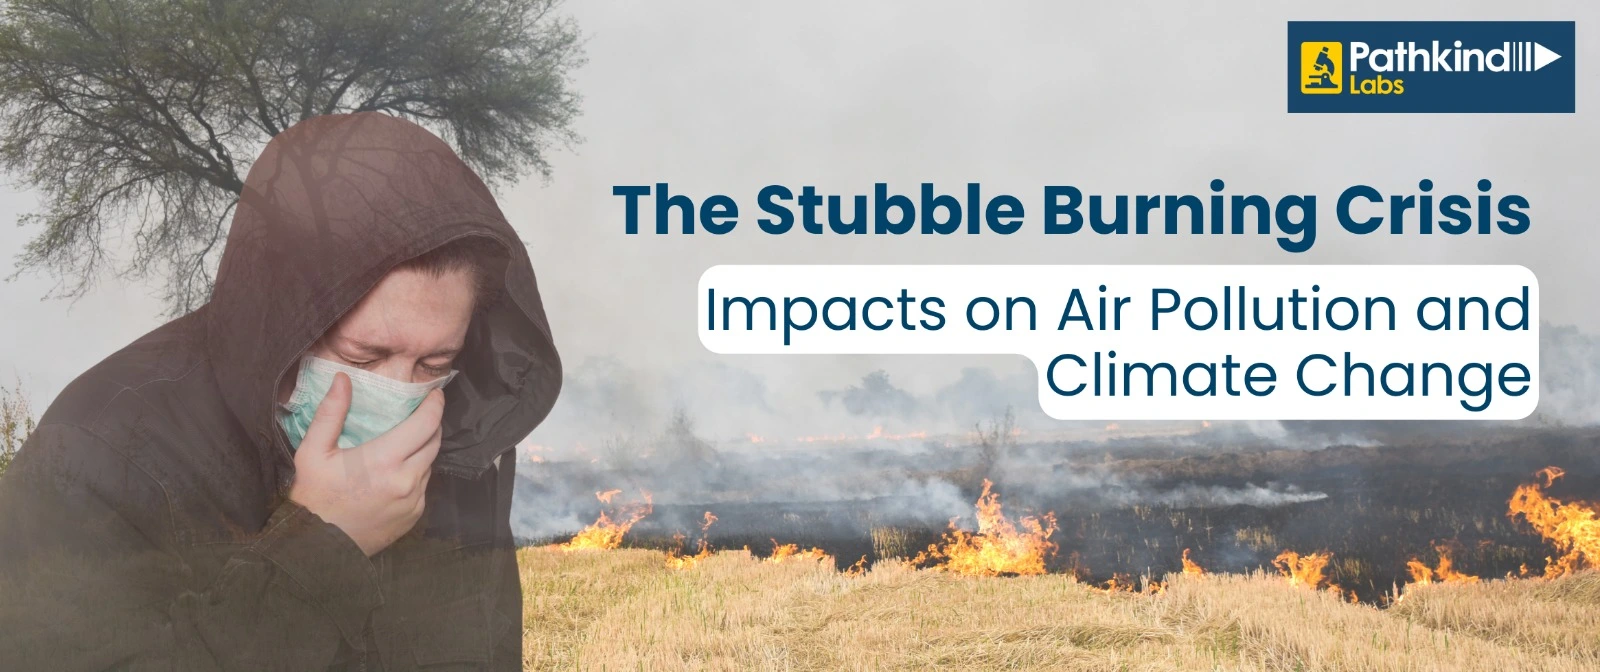 The Unseen Consequences of Stubble Burning on Our Planet